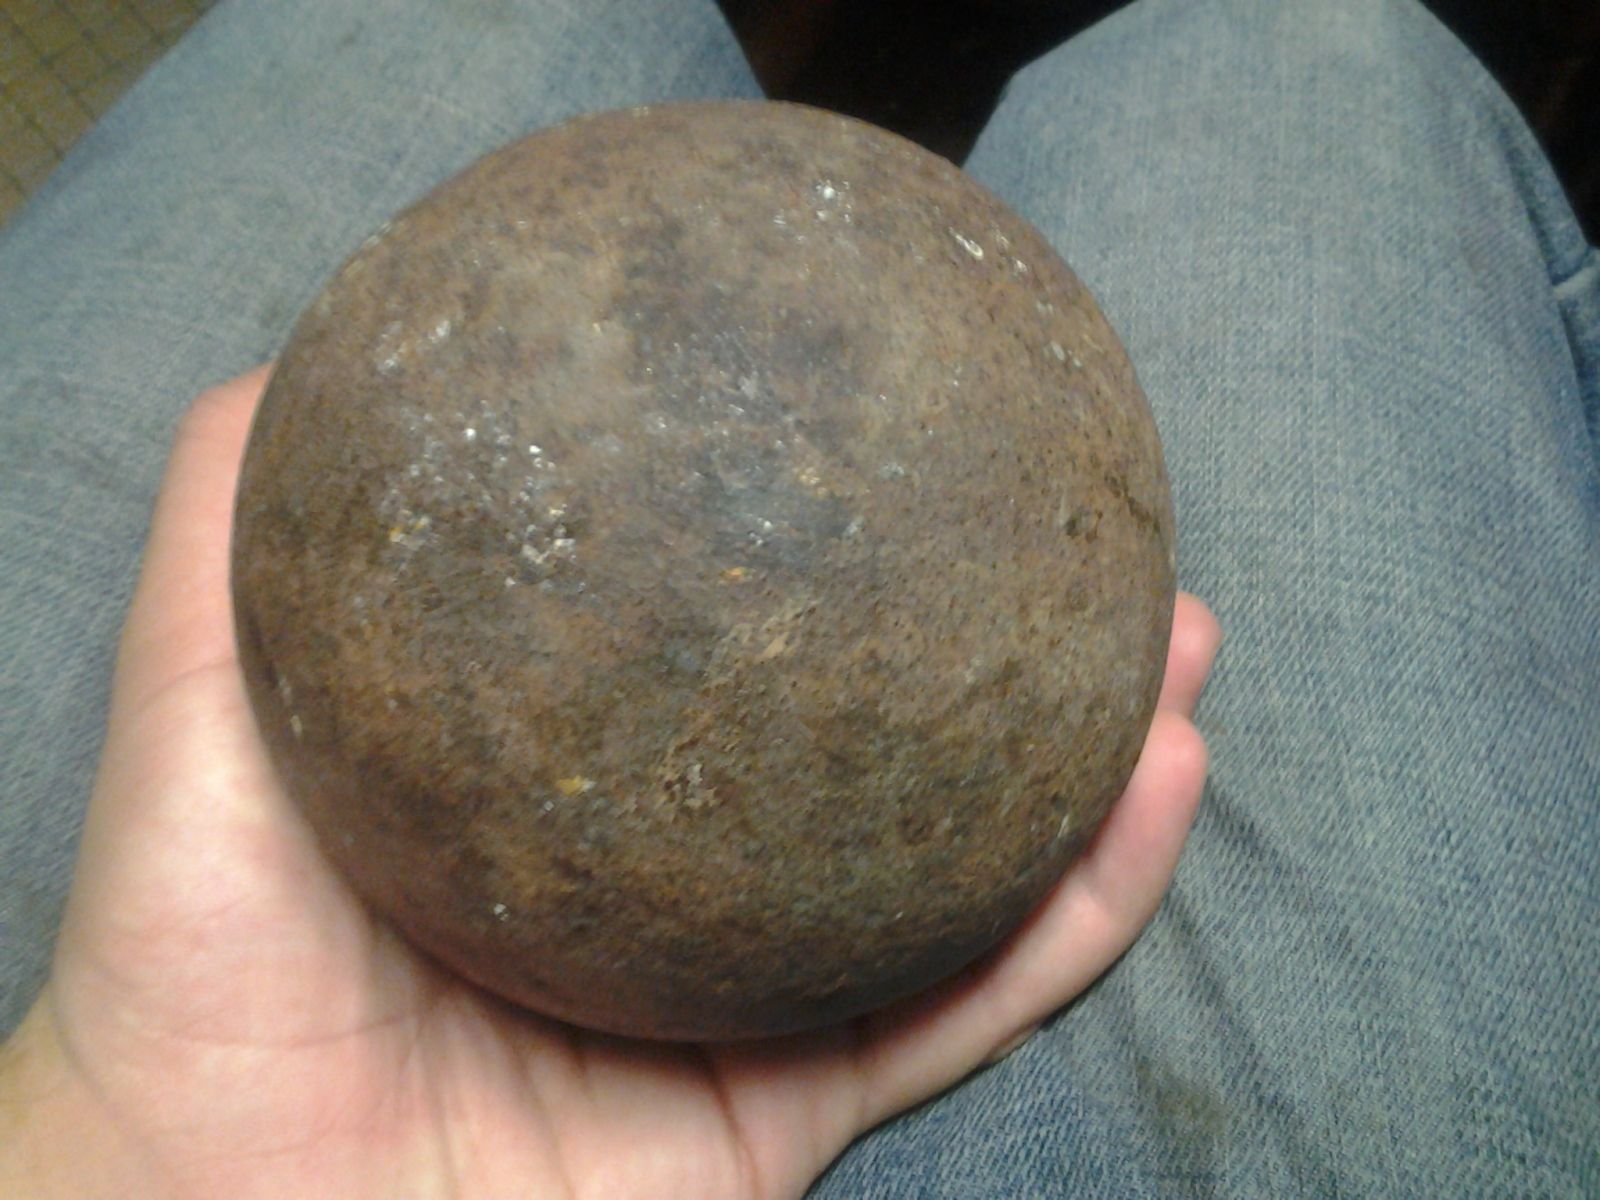 12 Pounder cannonball from the Battle of Brooklyn, August 27th 1776.